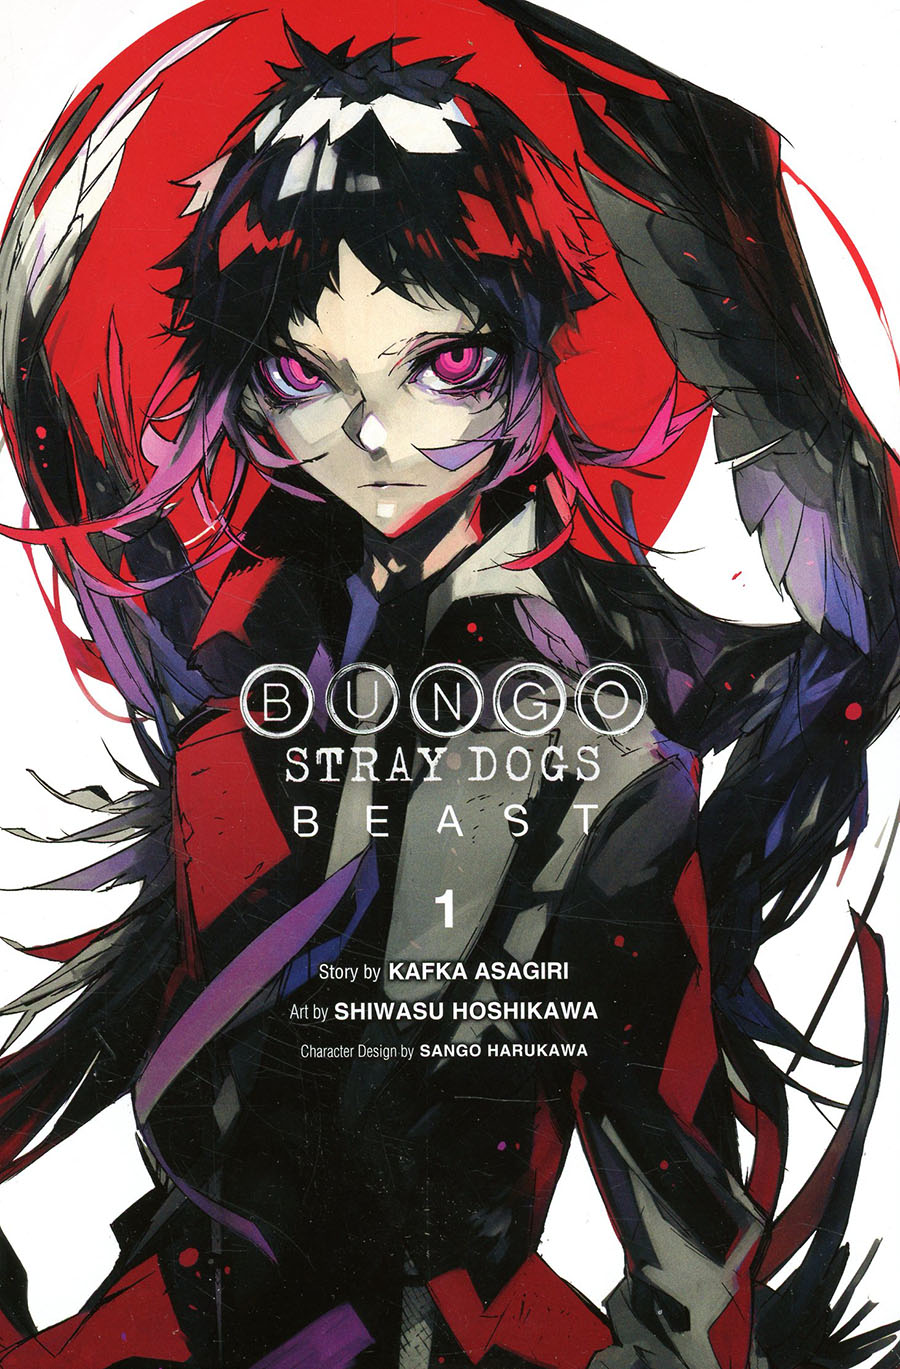 Bungo Stray Dogs Beast Vol 1 GN